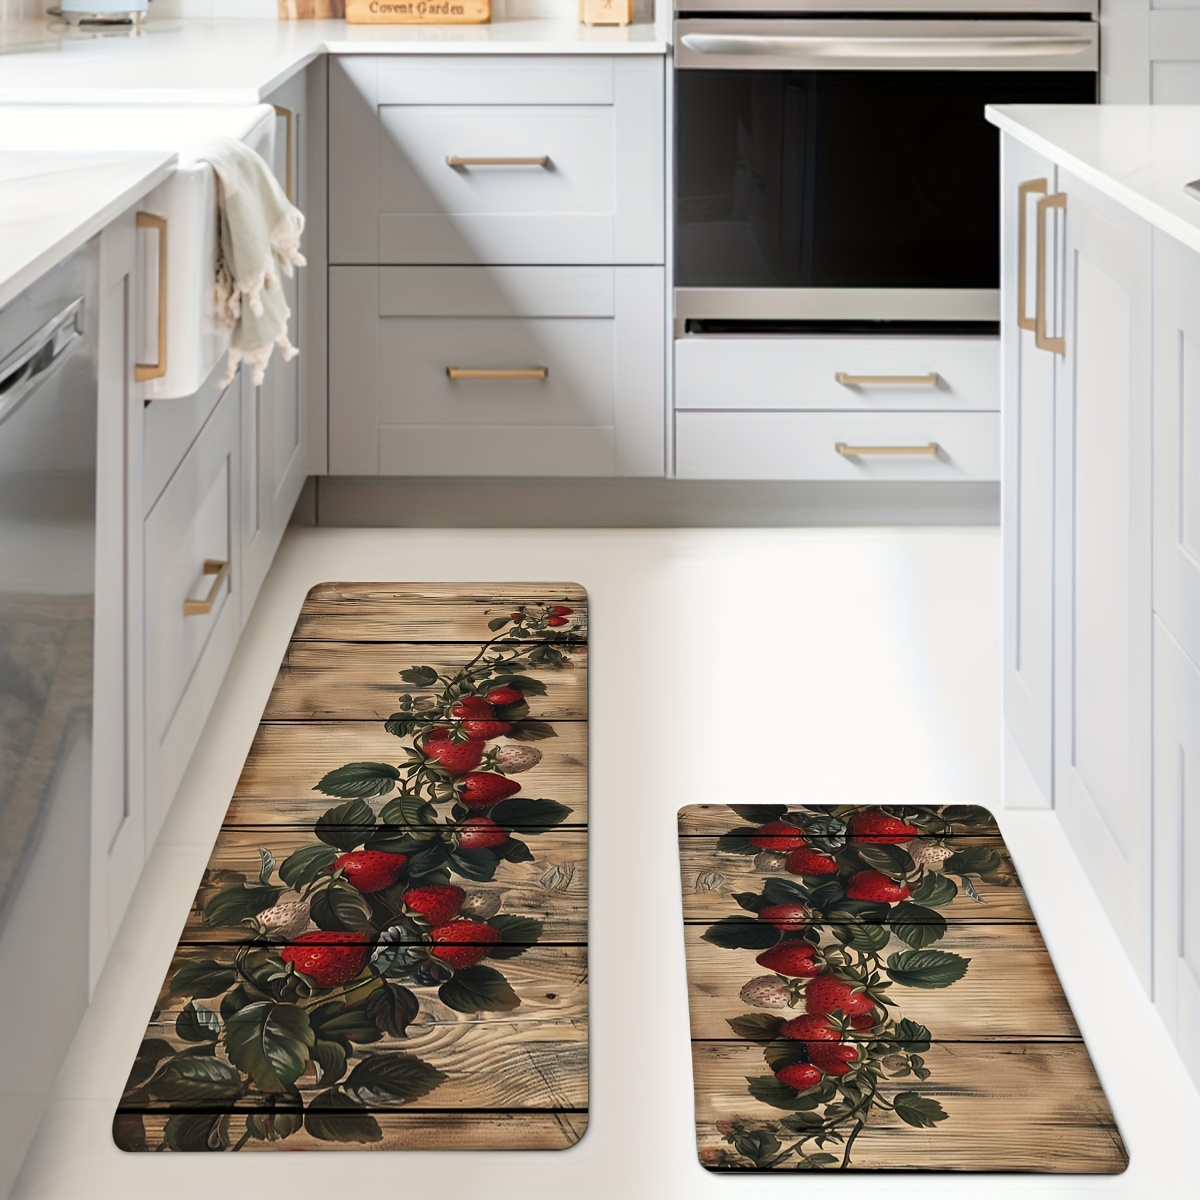 

1pc/2pcs, Strawberry Branch Kitchen Mats, Non-slip And Durable Bathroom Pads For Floor, Comfortable Standing Runner Rugs, Carpets For Kitchen, Home, Office, Laundry Room, Bathroom, Spring Decor